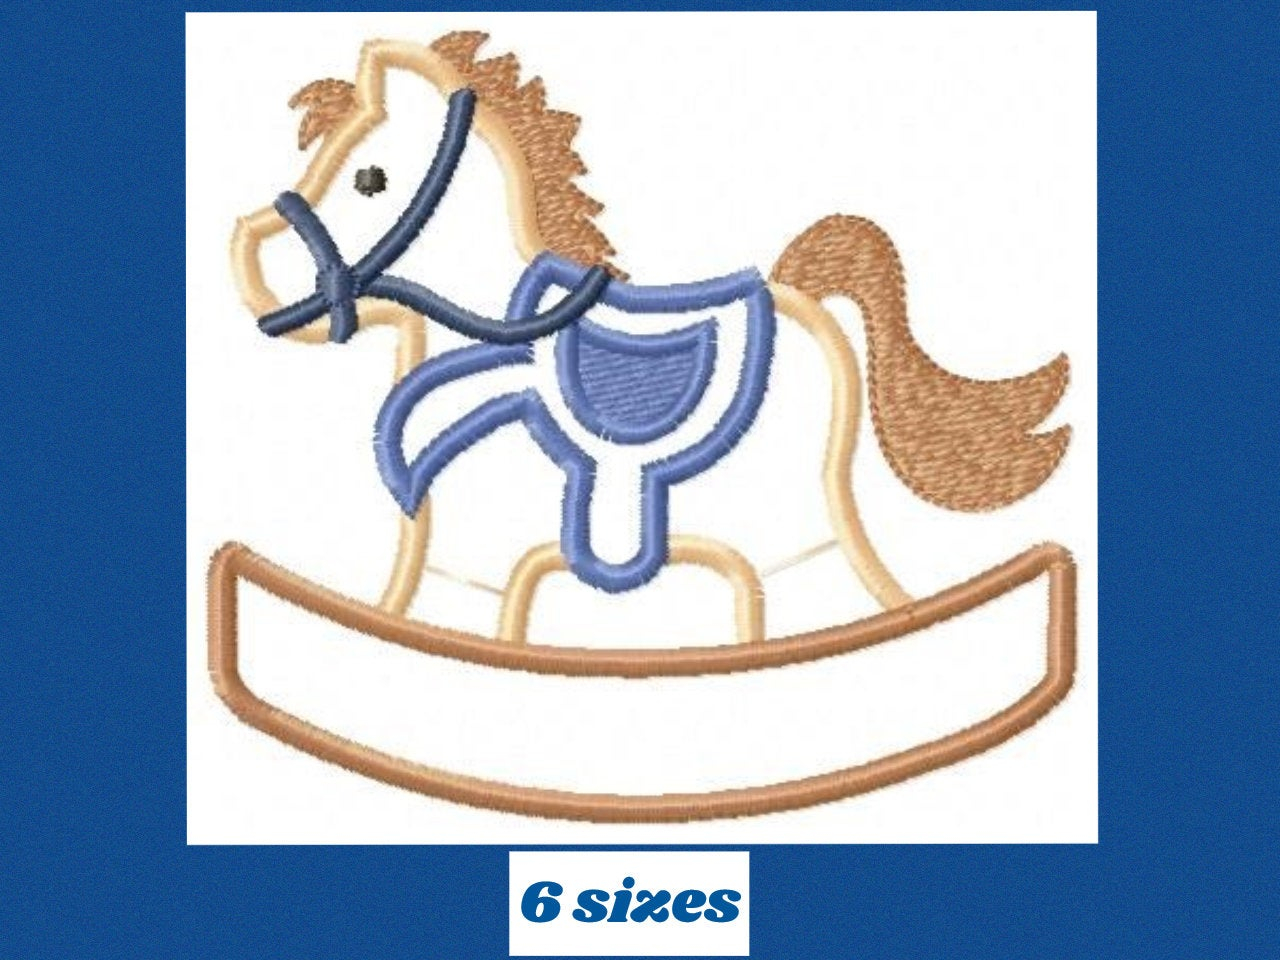 Horse Embroidery Patterns Horse Toy Embroidery Design Boy Embroidery Designs Machine Embroidery Pattern Ba Embroidery File Toy Applique Horse Applique